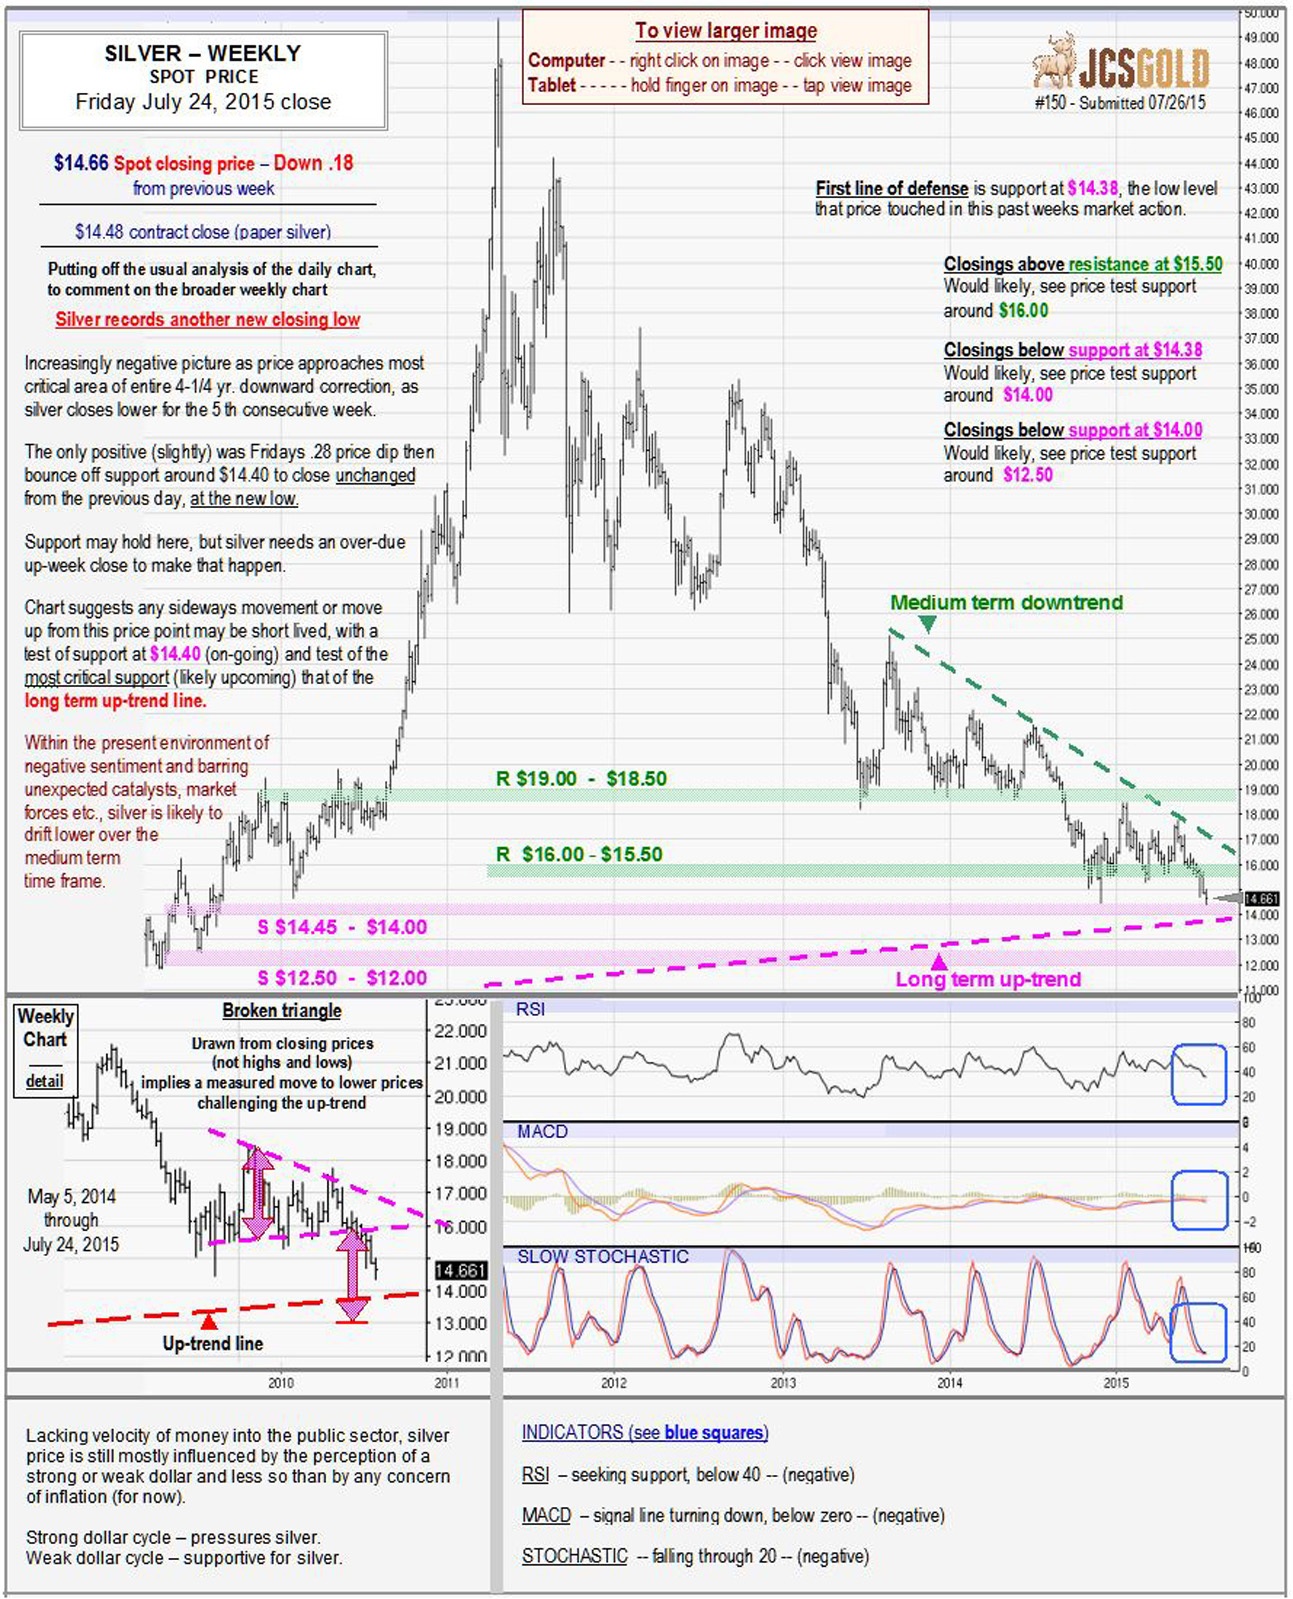 July 24, 2015 chart & commentary